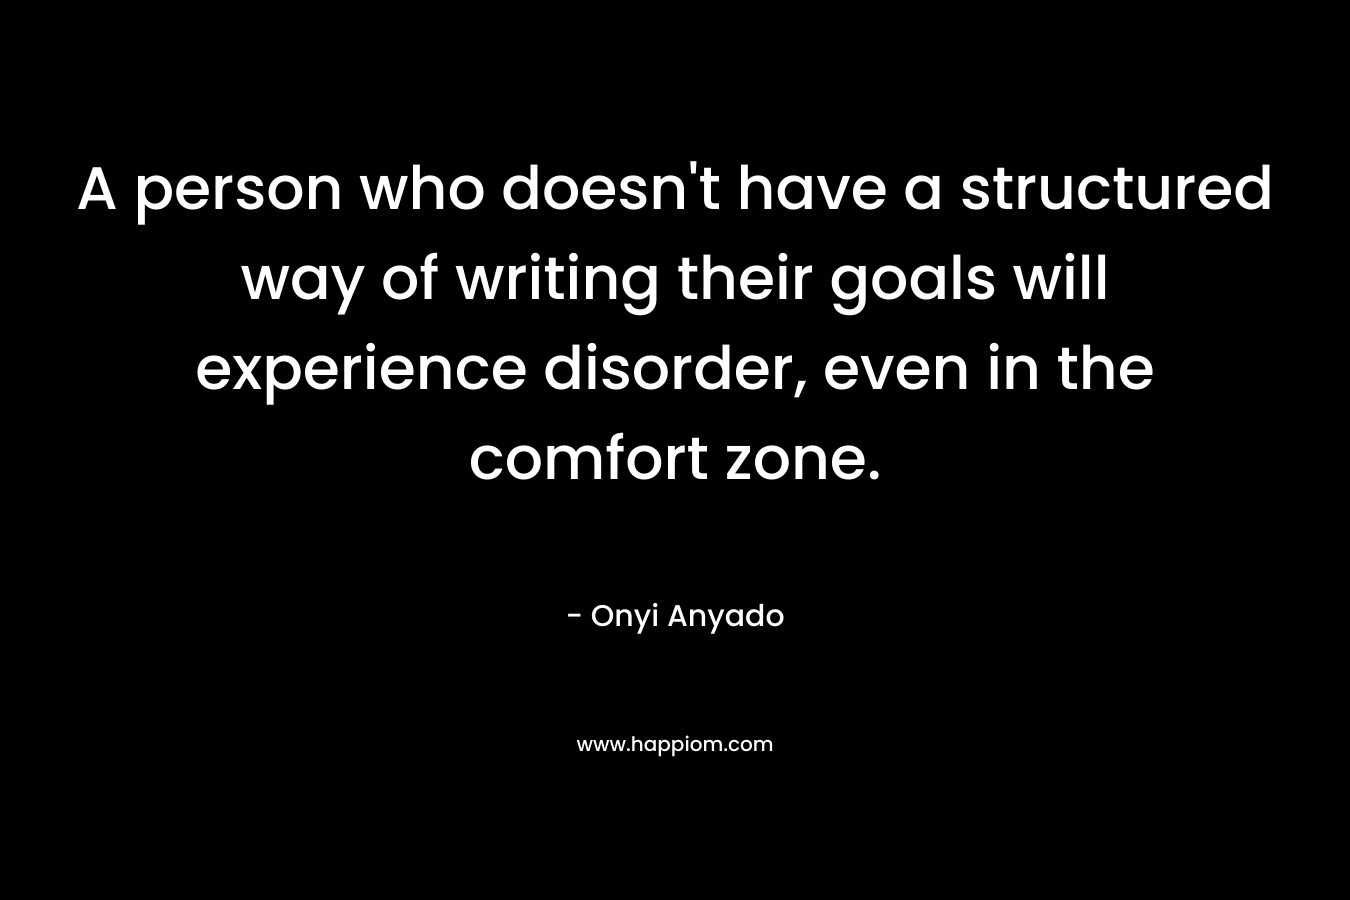 A person who doesn’t have a structured way of writing their goals will experience disorder, even in the comfort zone. – Onyi Anyado